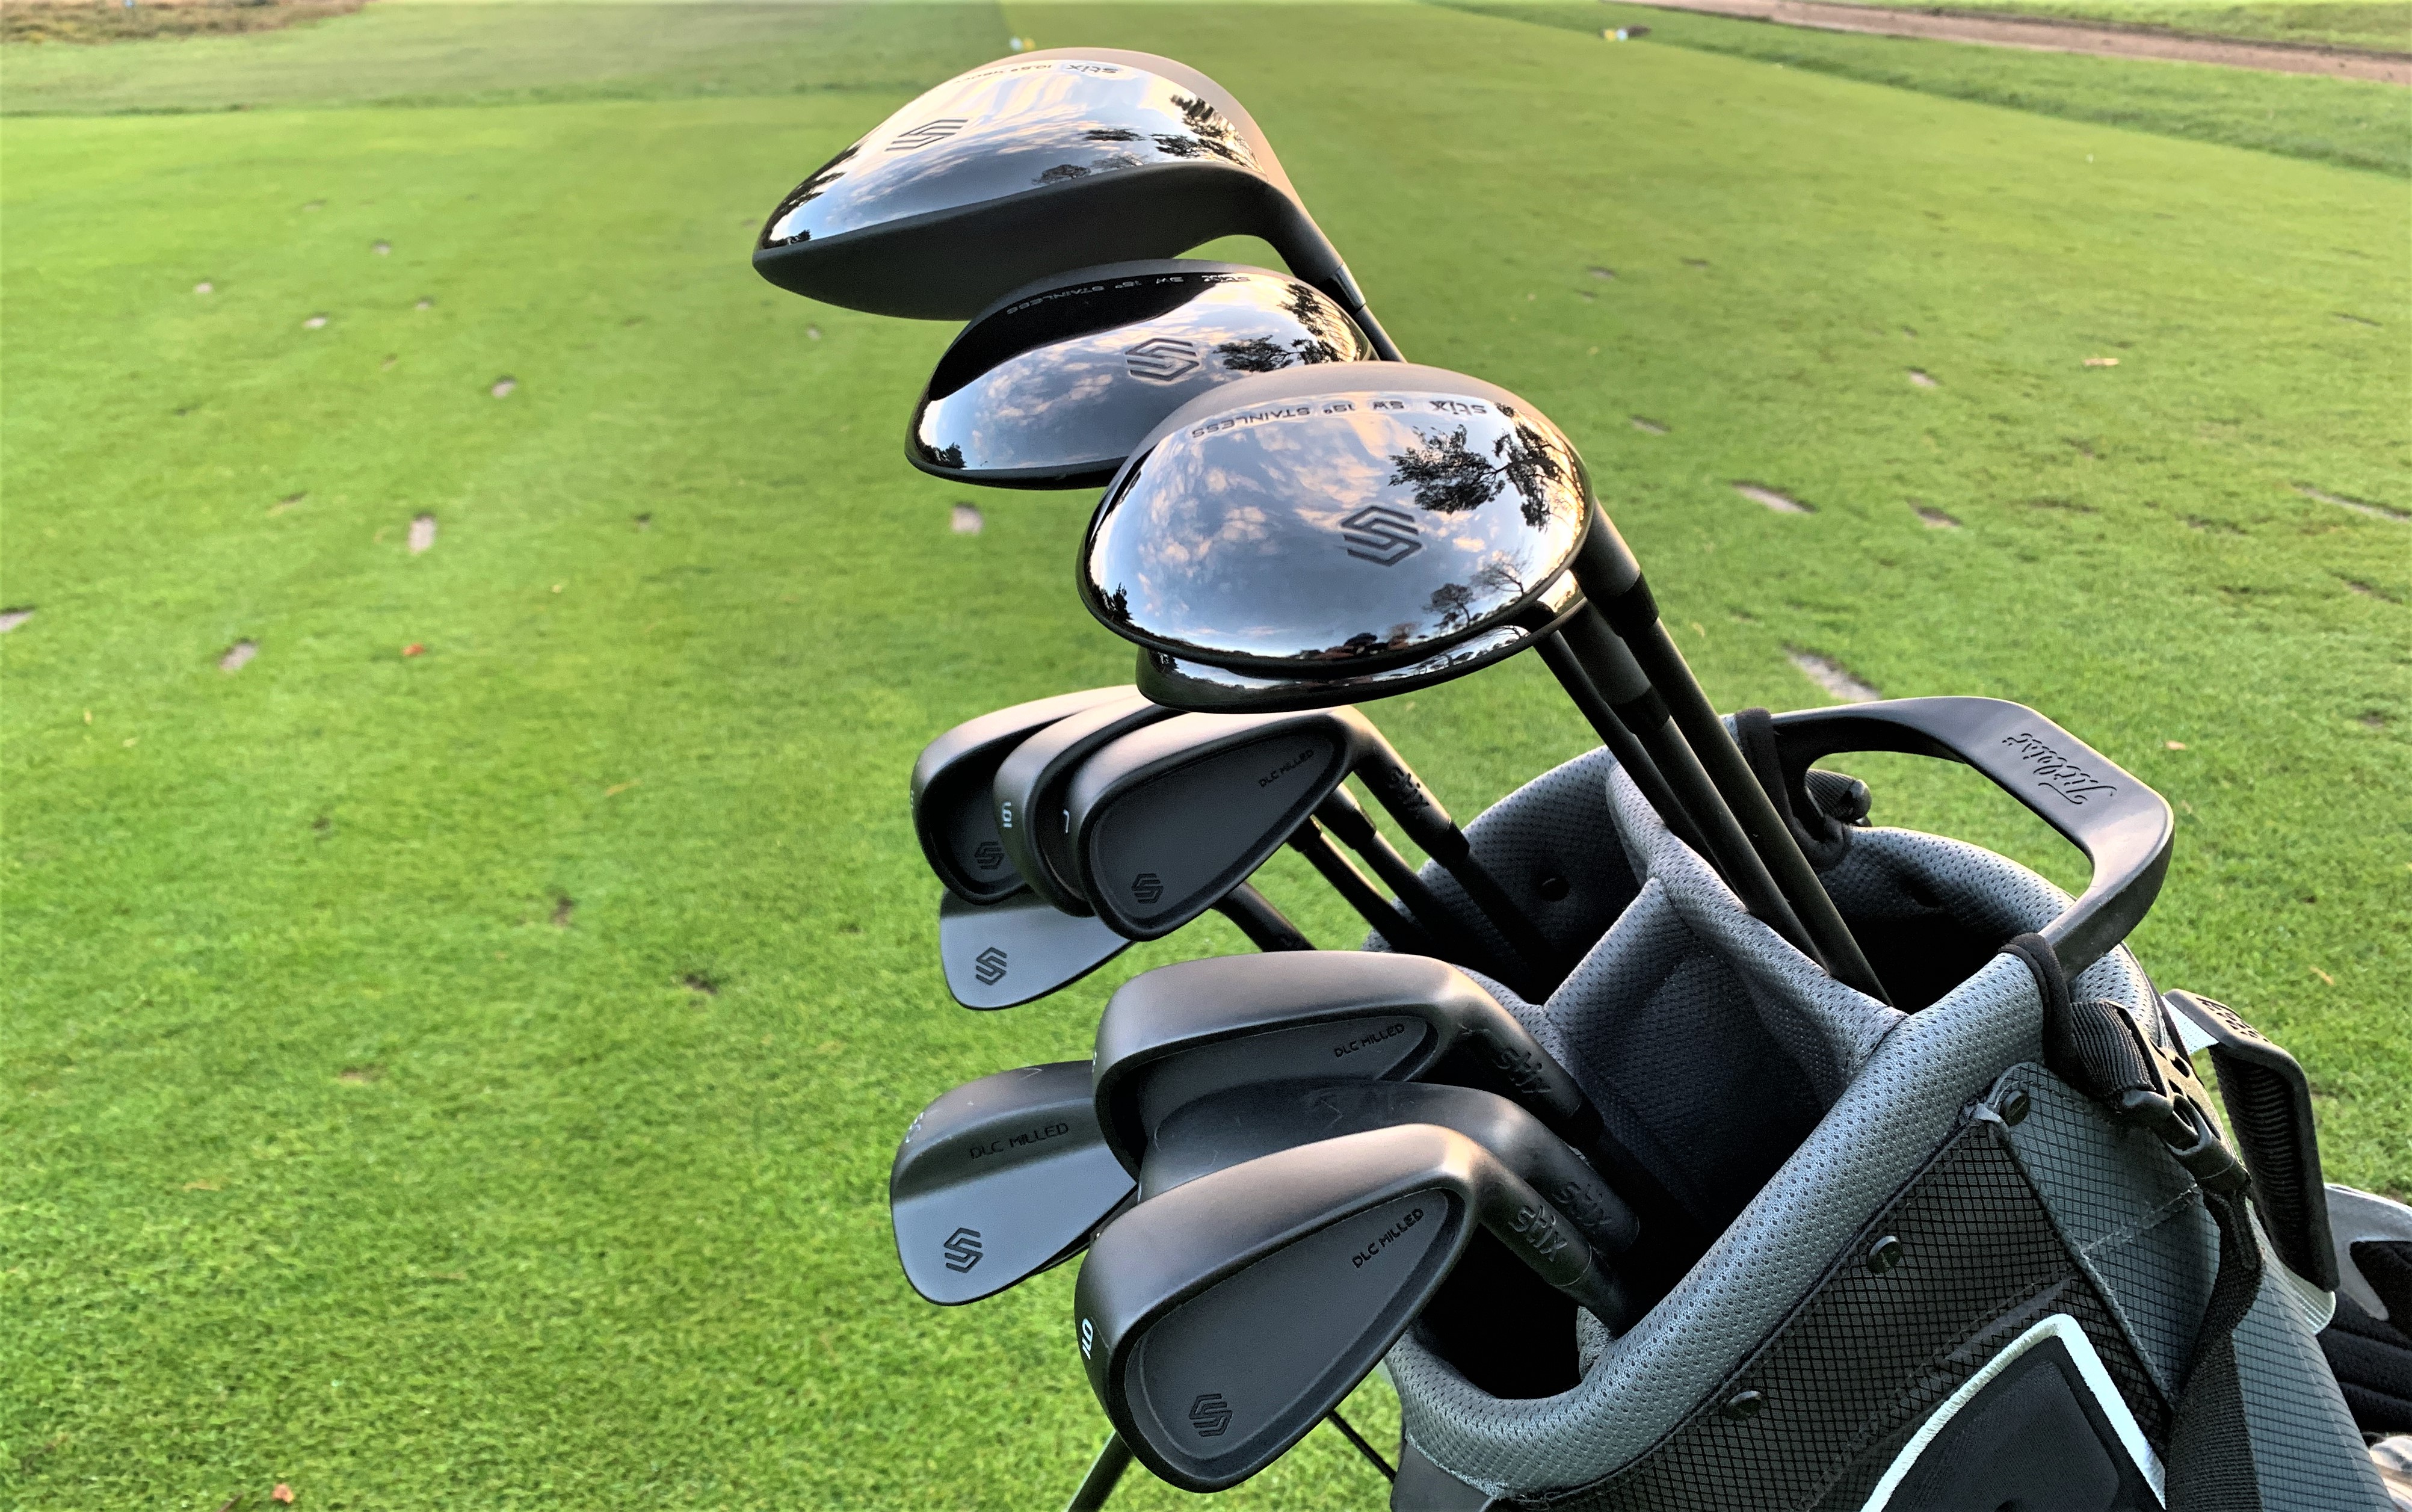 With $799 Set Of Golf Clubs, Stix Seeks To Become Industry Disruptor